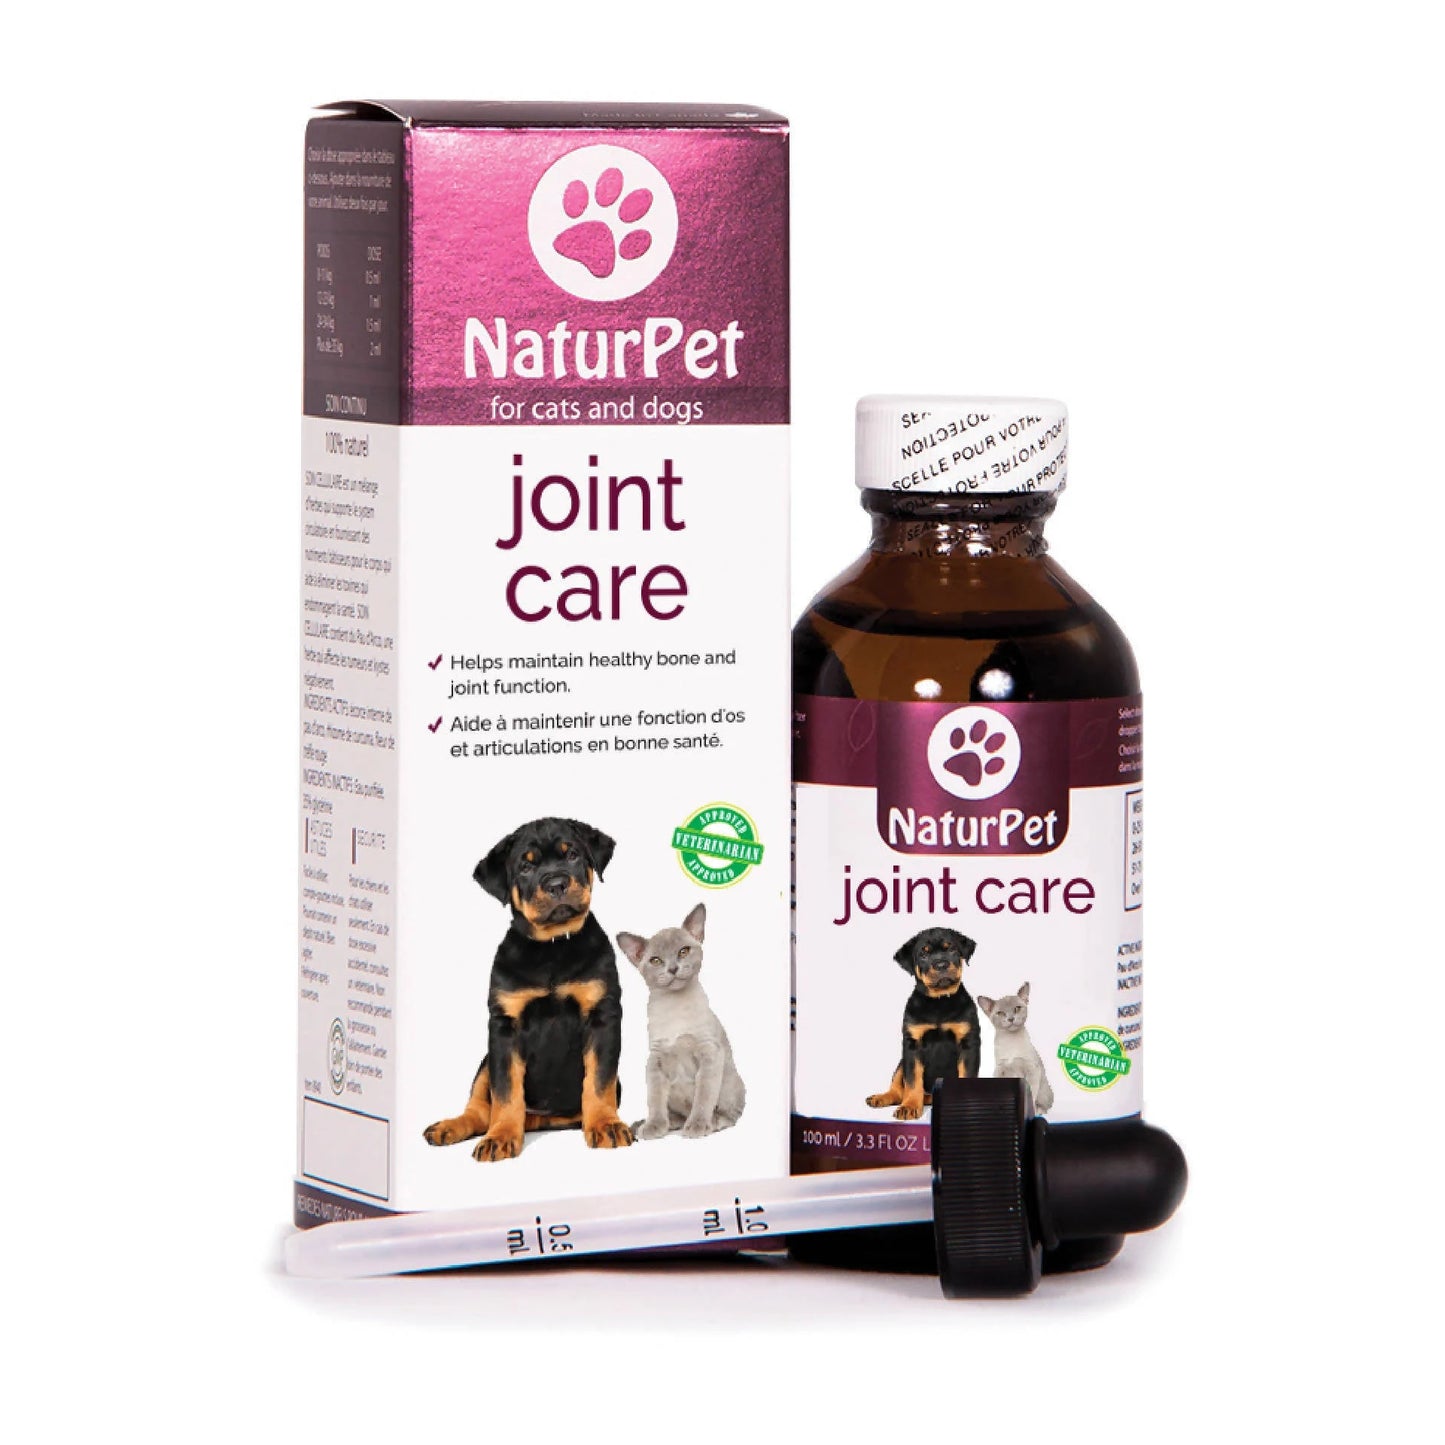 NaturPet - Joint Care Supplement For Cats & Dogs